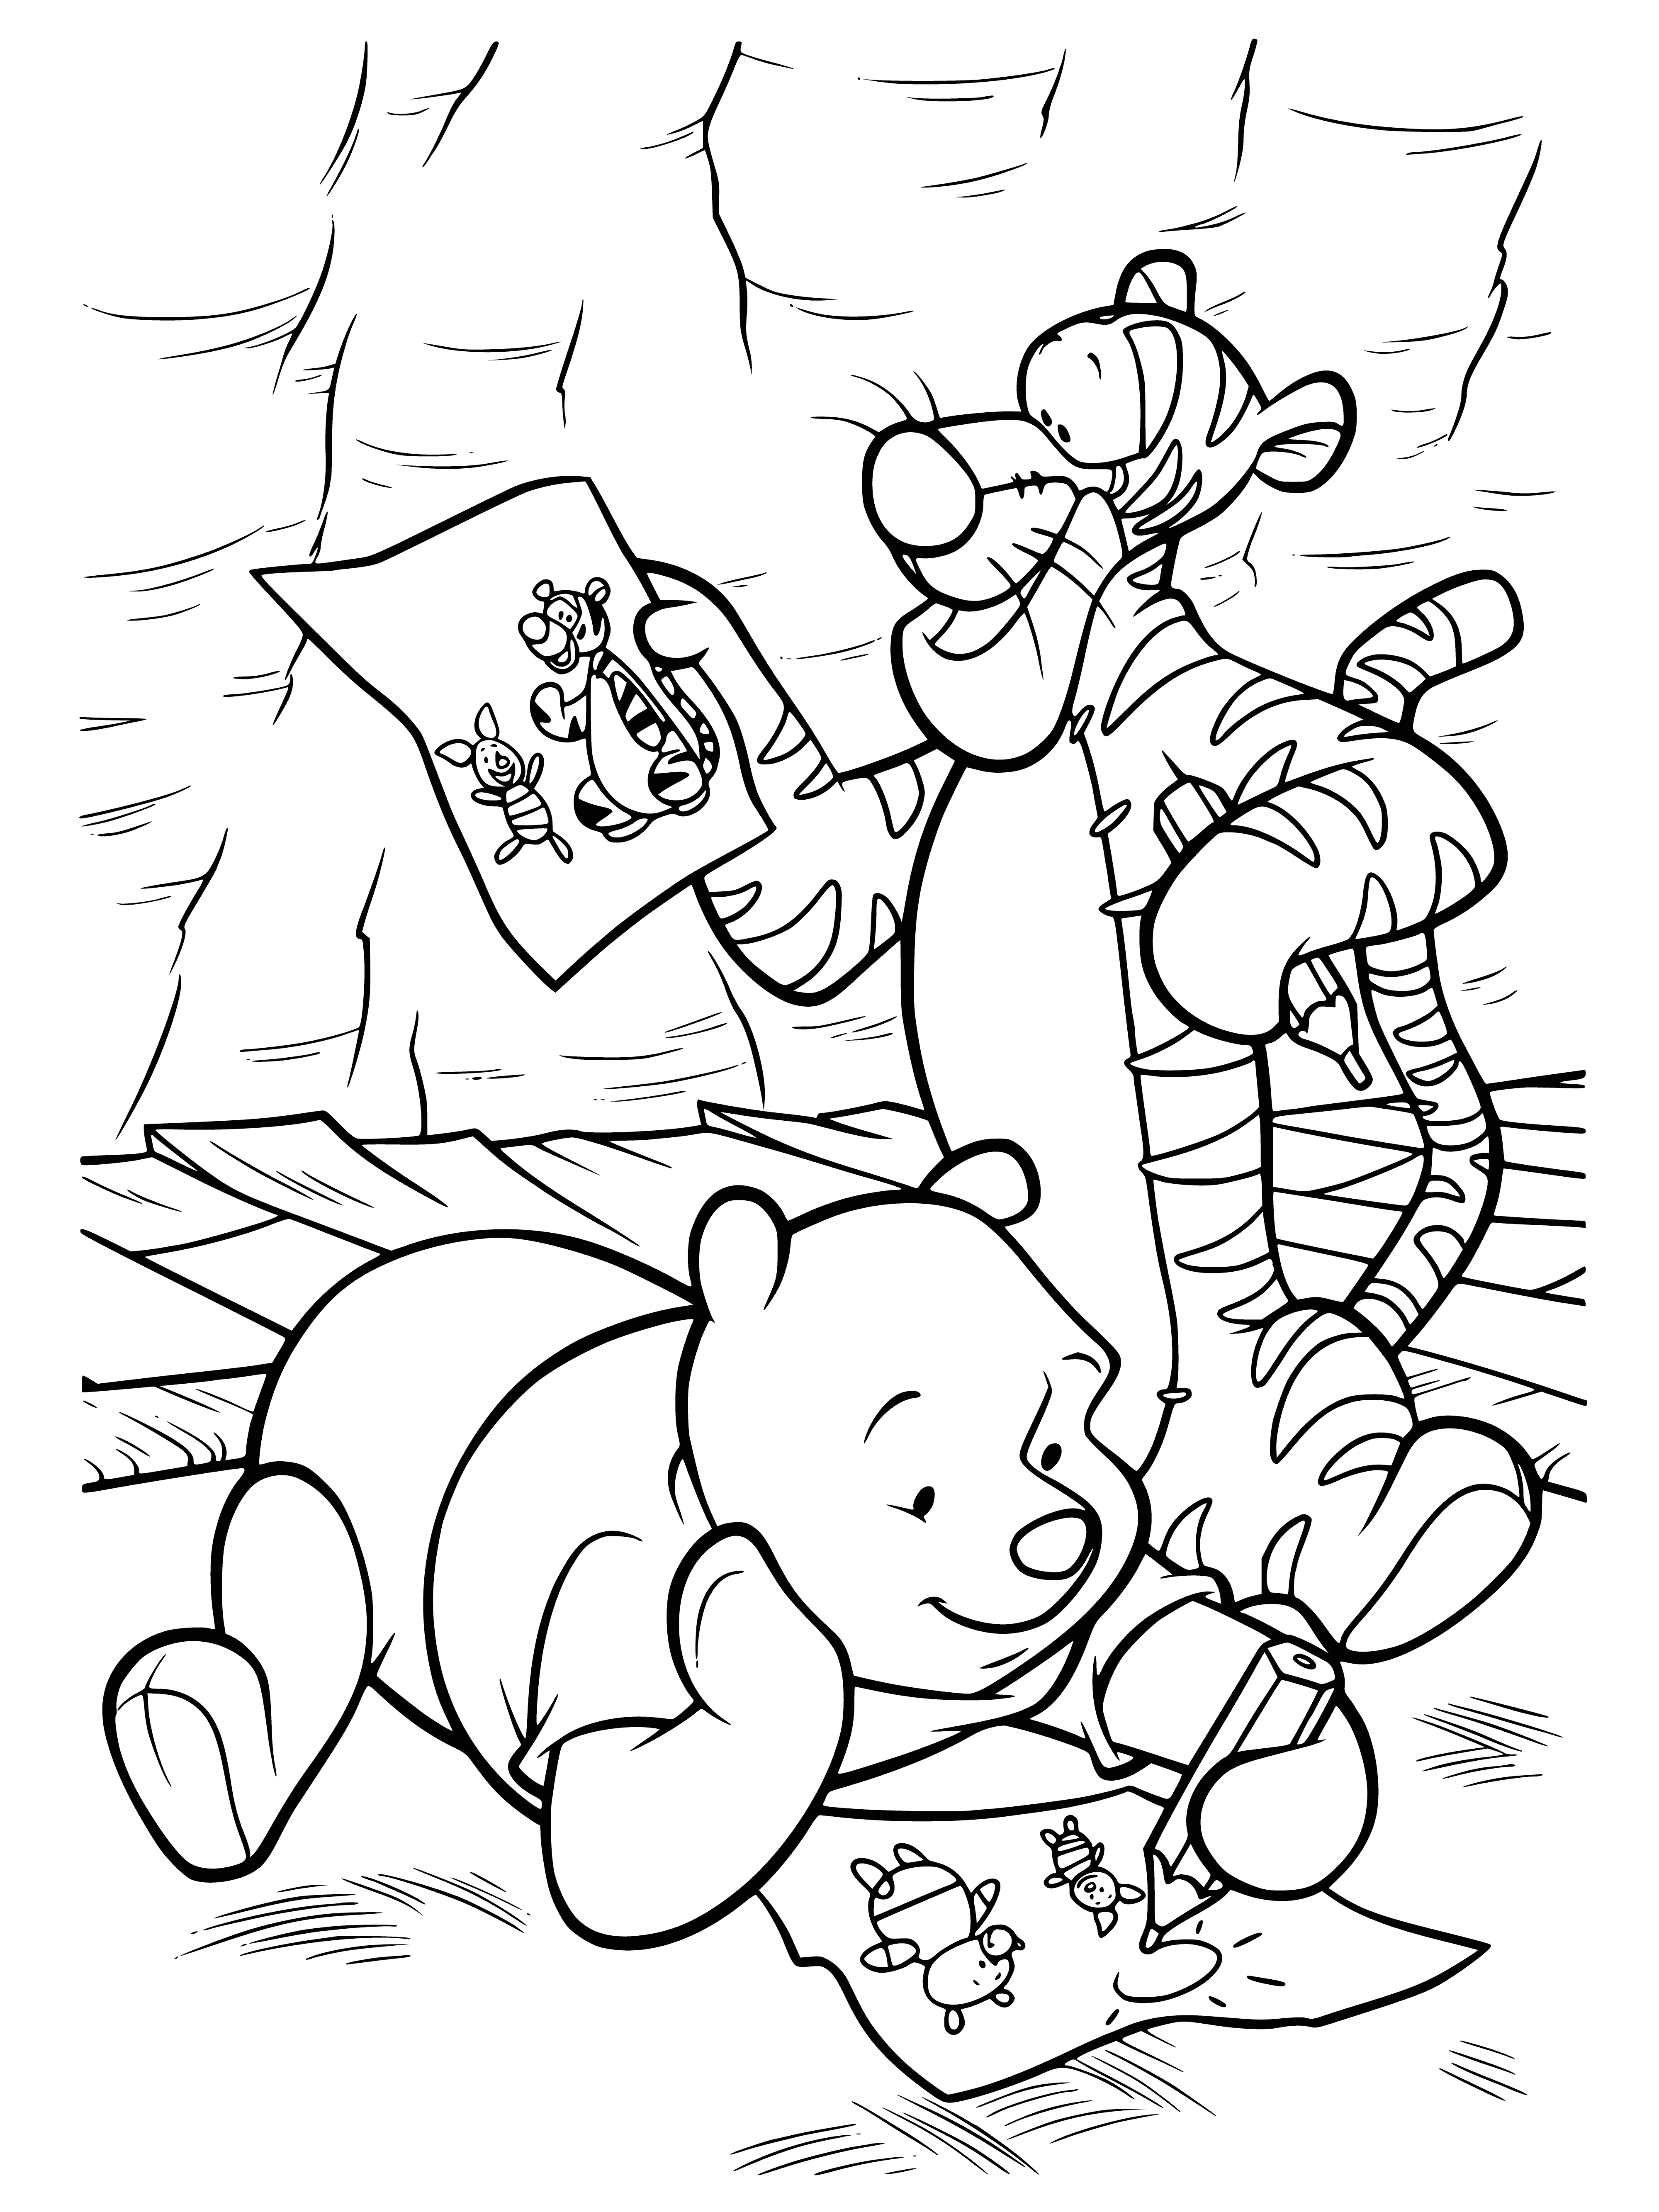 Painting coloring page